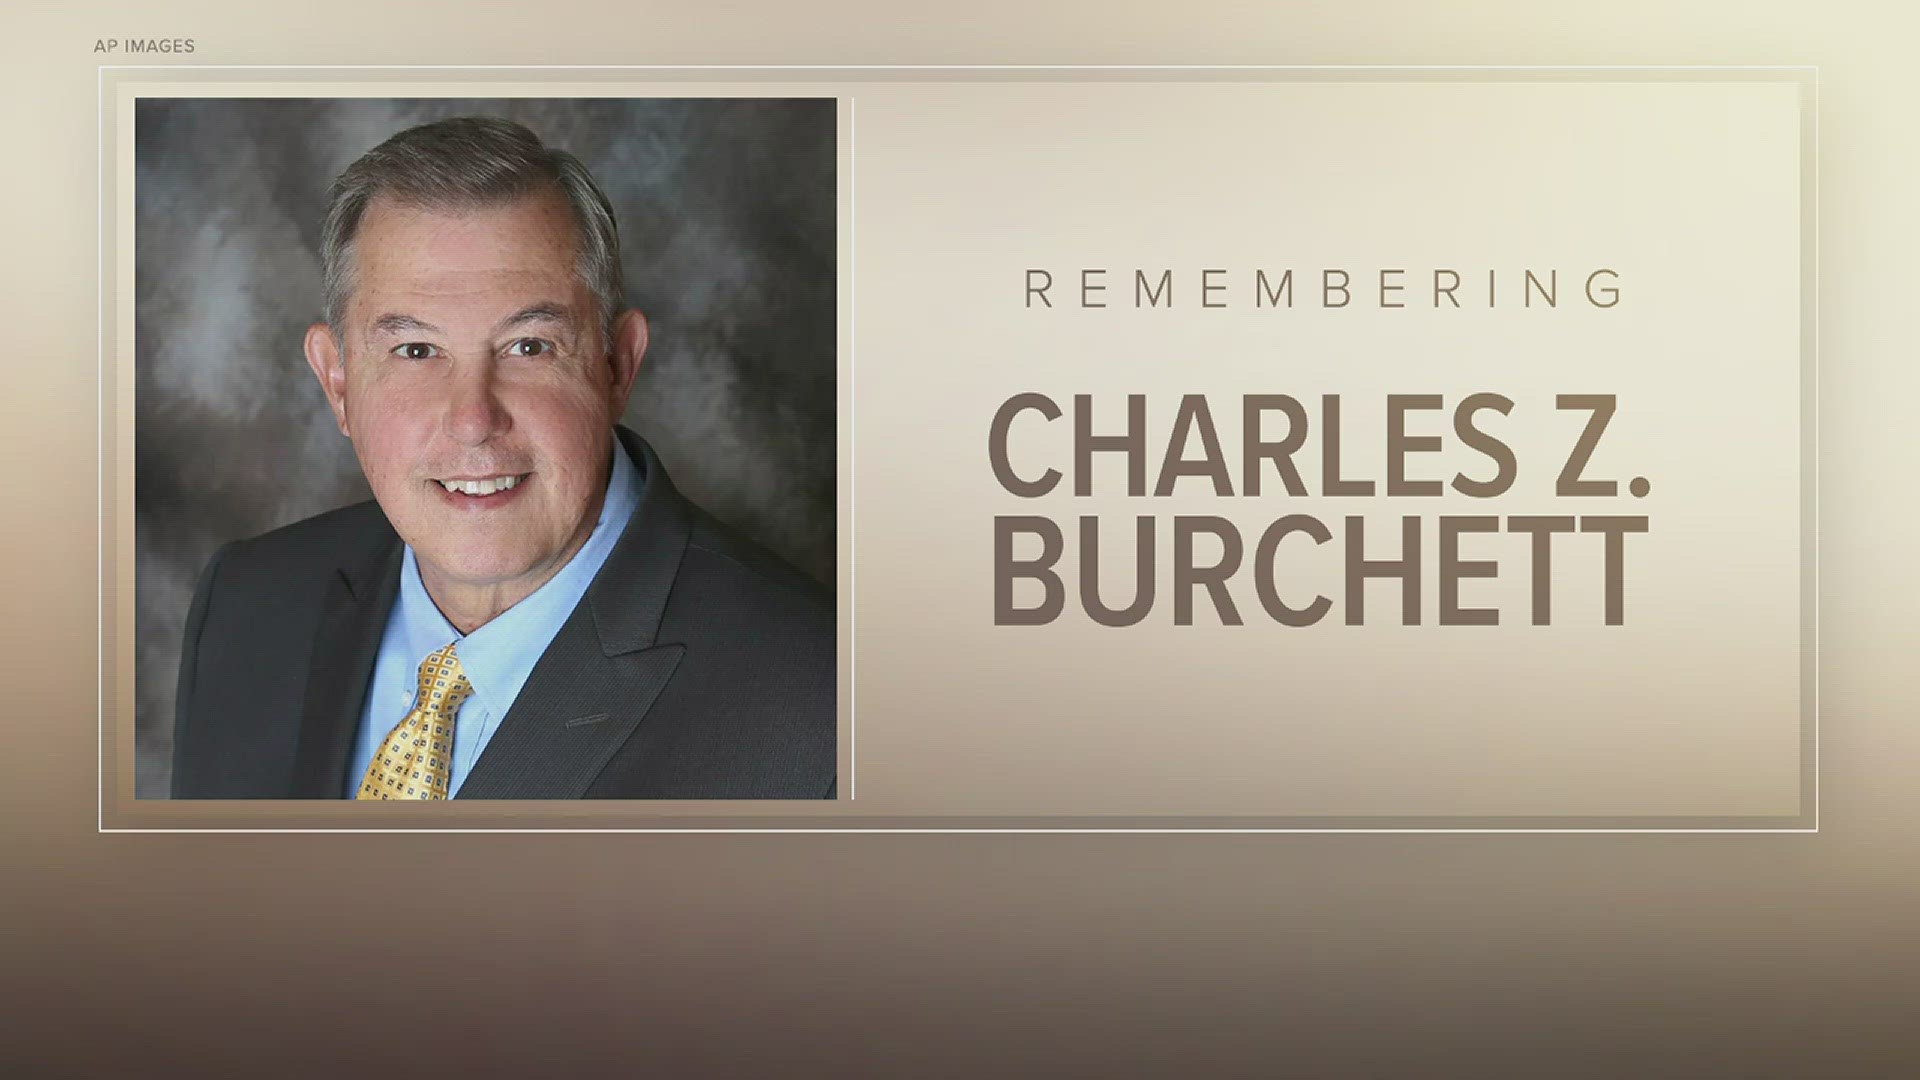 A funeral service will be held Sunday, March 19, 2023 at 3 p.m. at First Baptist Church in Kirbyville with burial at Kirbyville Cemetery.